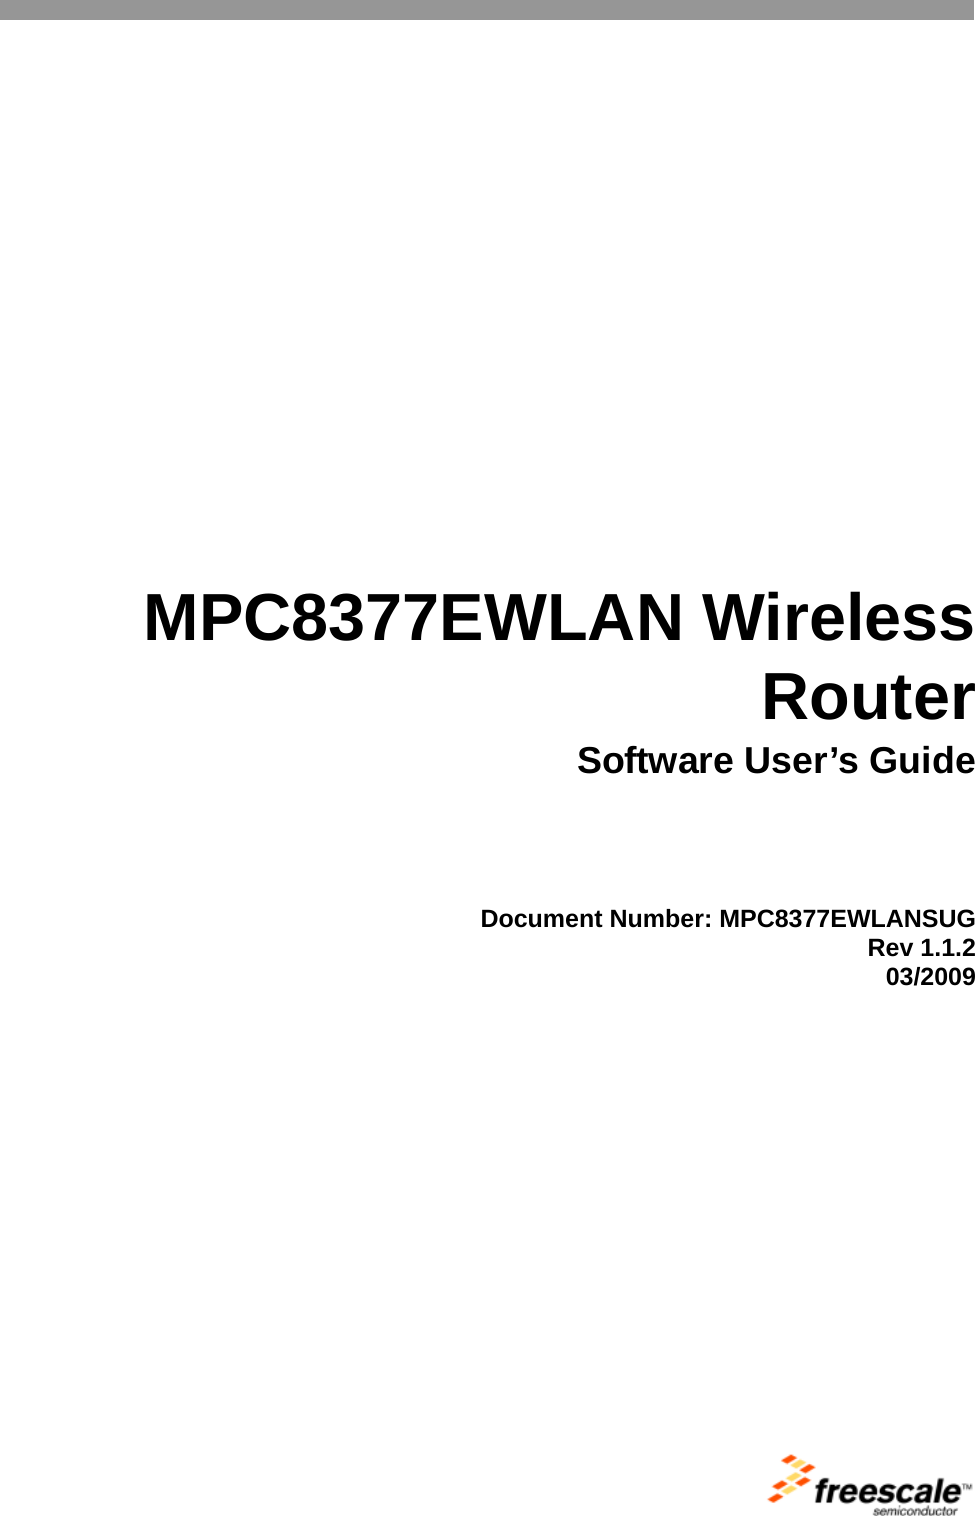     MPC8377EWLAN Wireless Router Software User’s Guide    Document Number: MPC8377EWLANSUG Rev 1.1.2 03/2009    